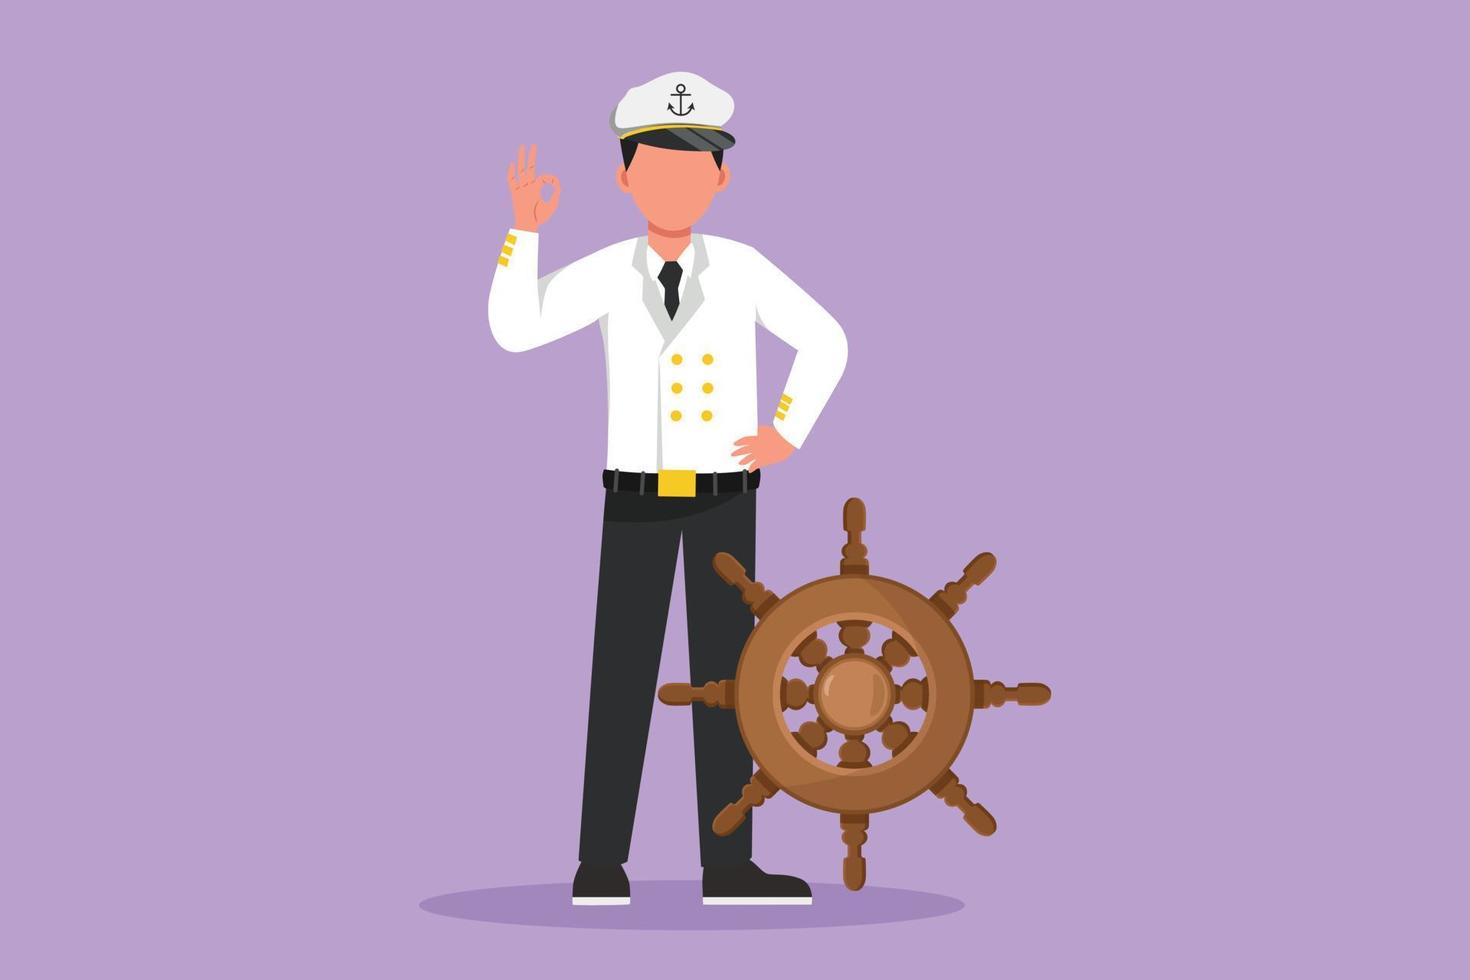 Cartoon flat style drawing sailor man standing with okay gesture to be part of cruise ship, carrying passengers traveling across seas. Male sailor on duty in ocean. Graphic design vector illustration